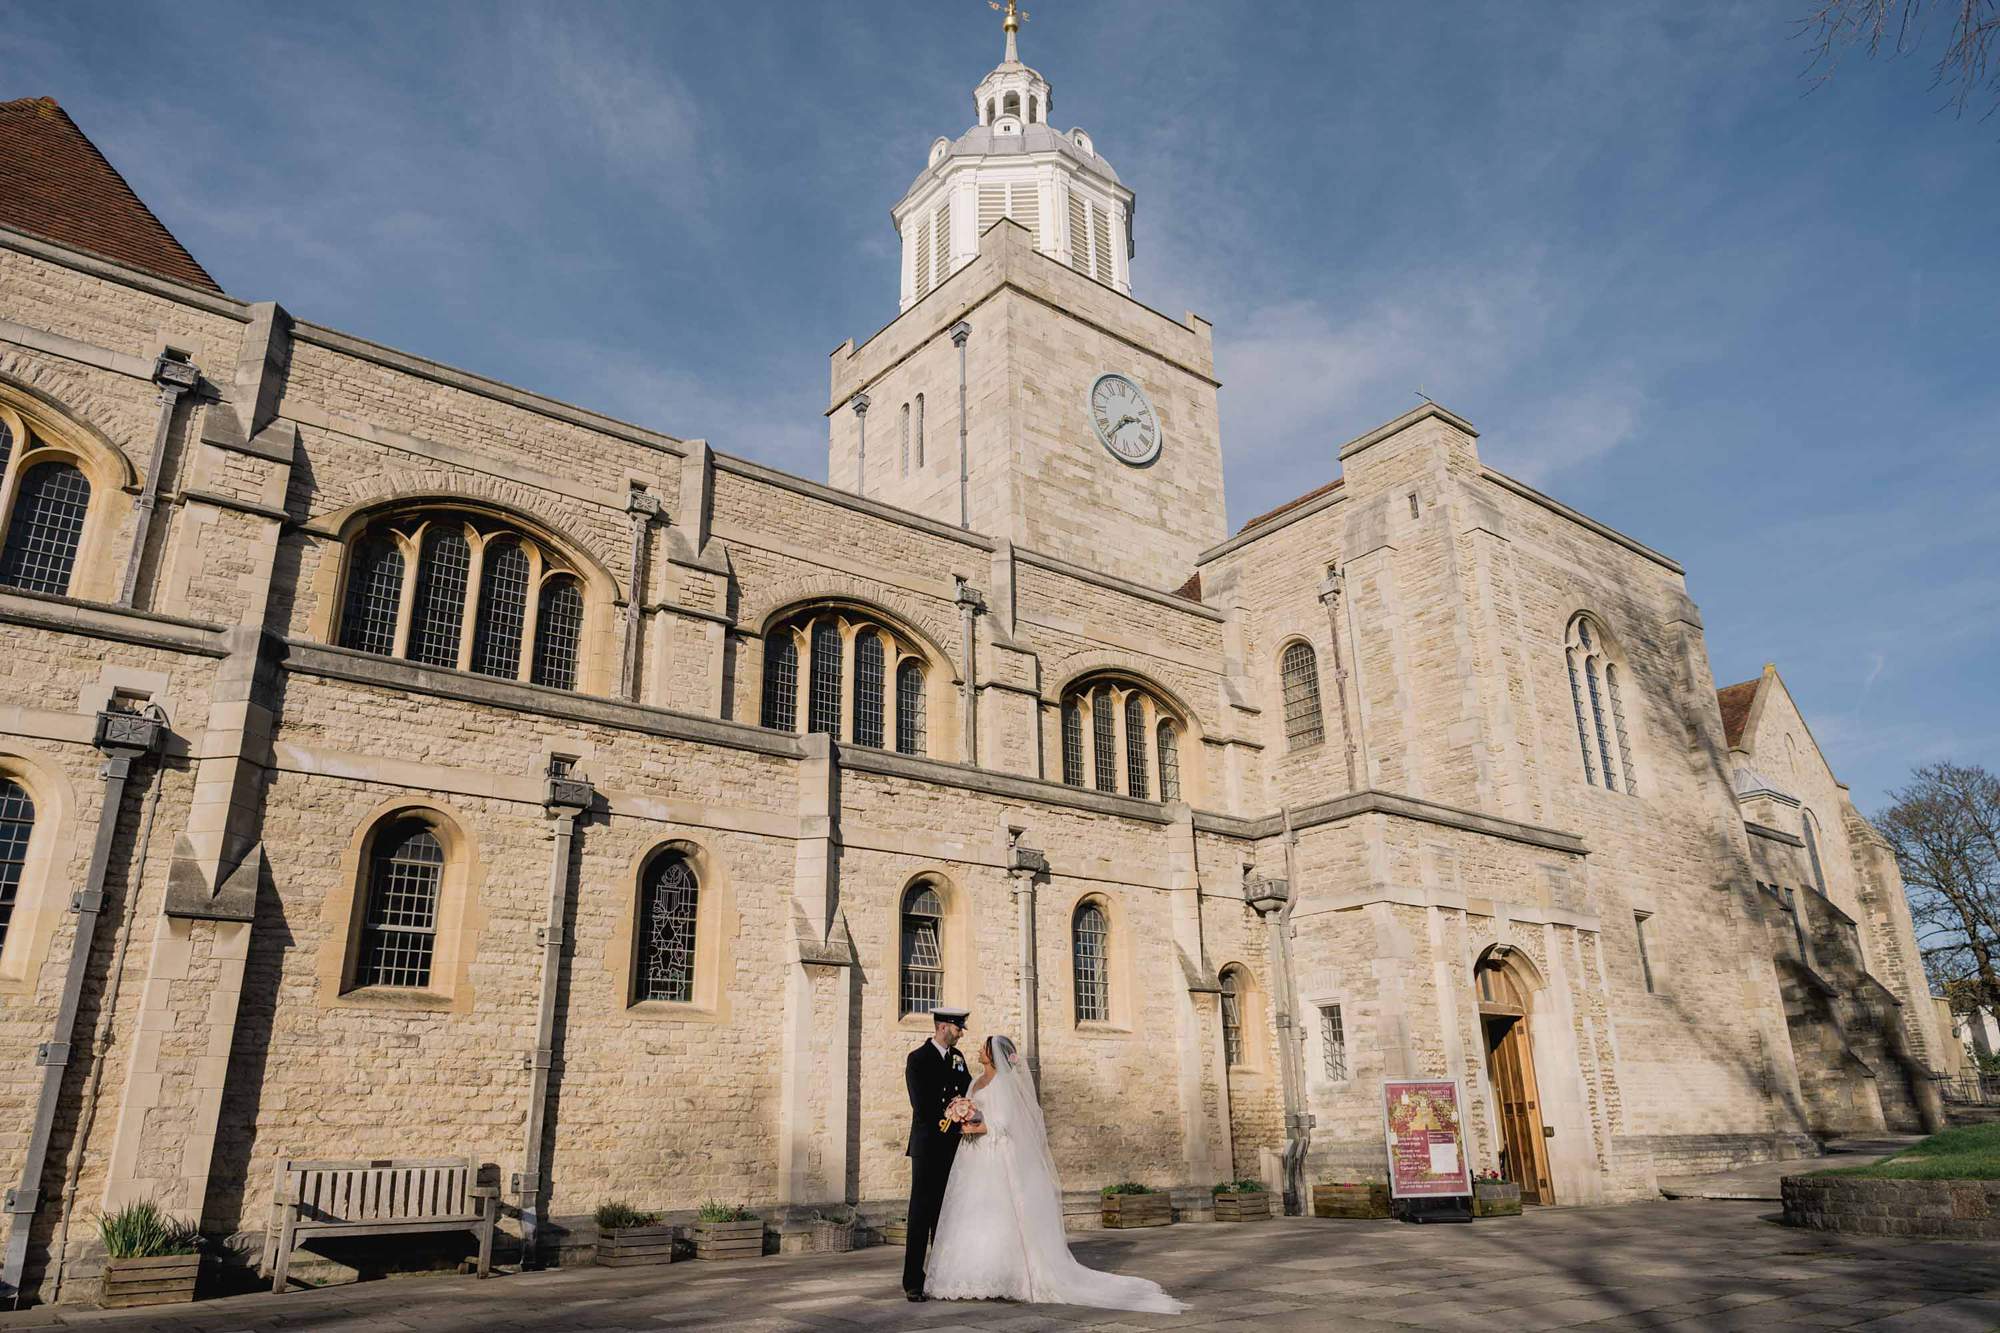 Bride and groom have a cuddle on their wedding day at Portsmouth Cathedral.